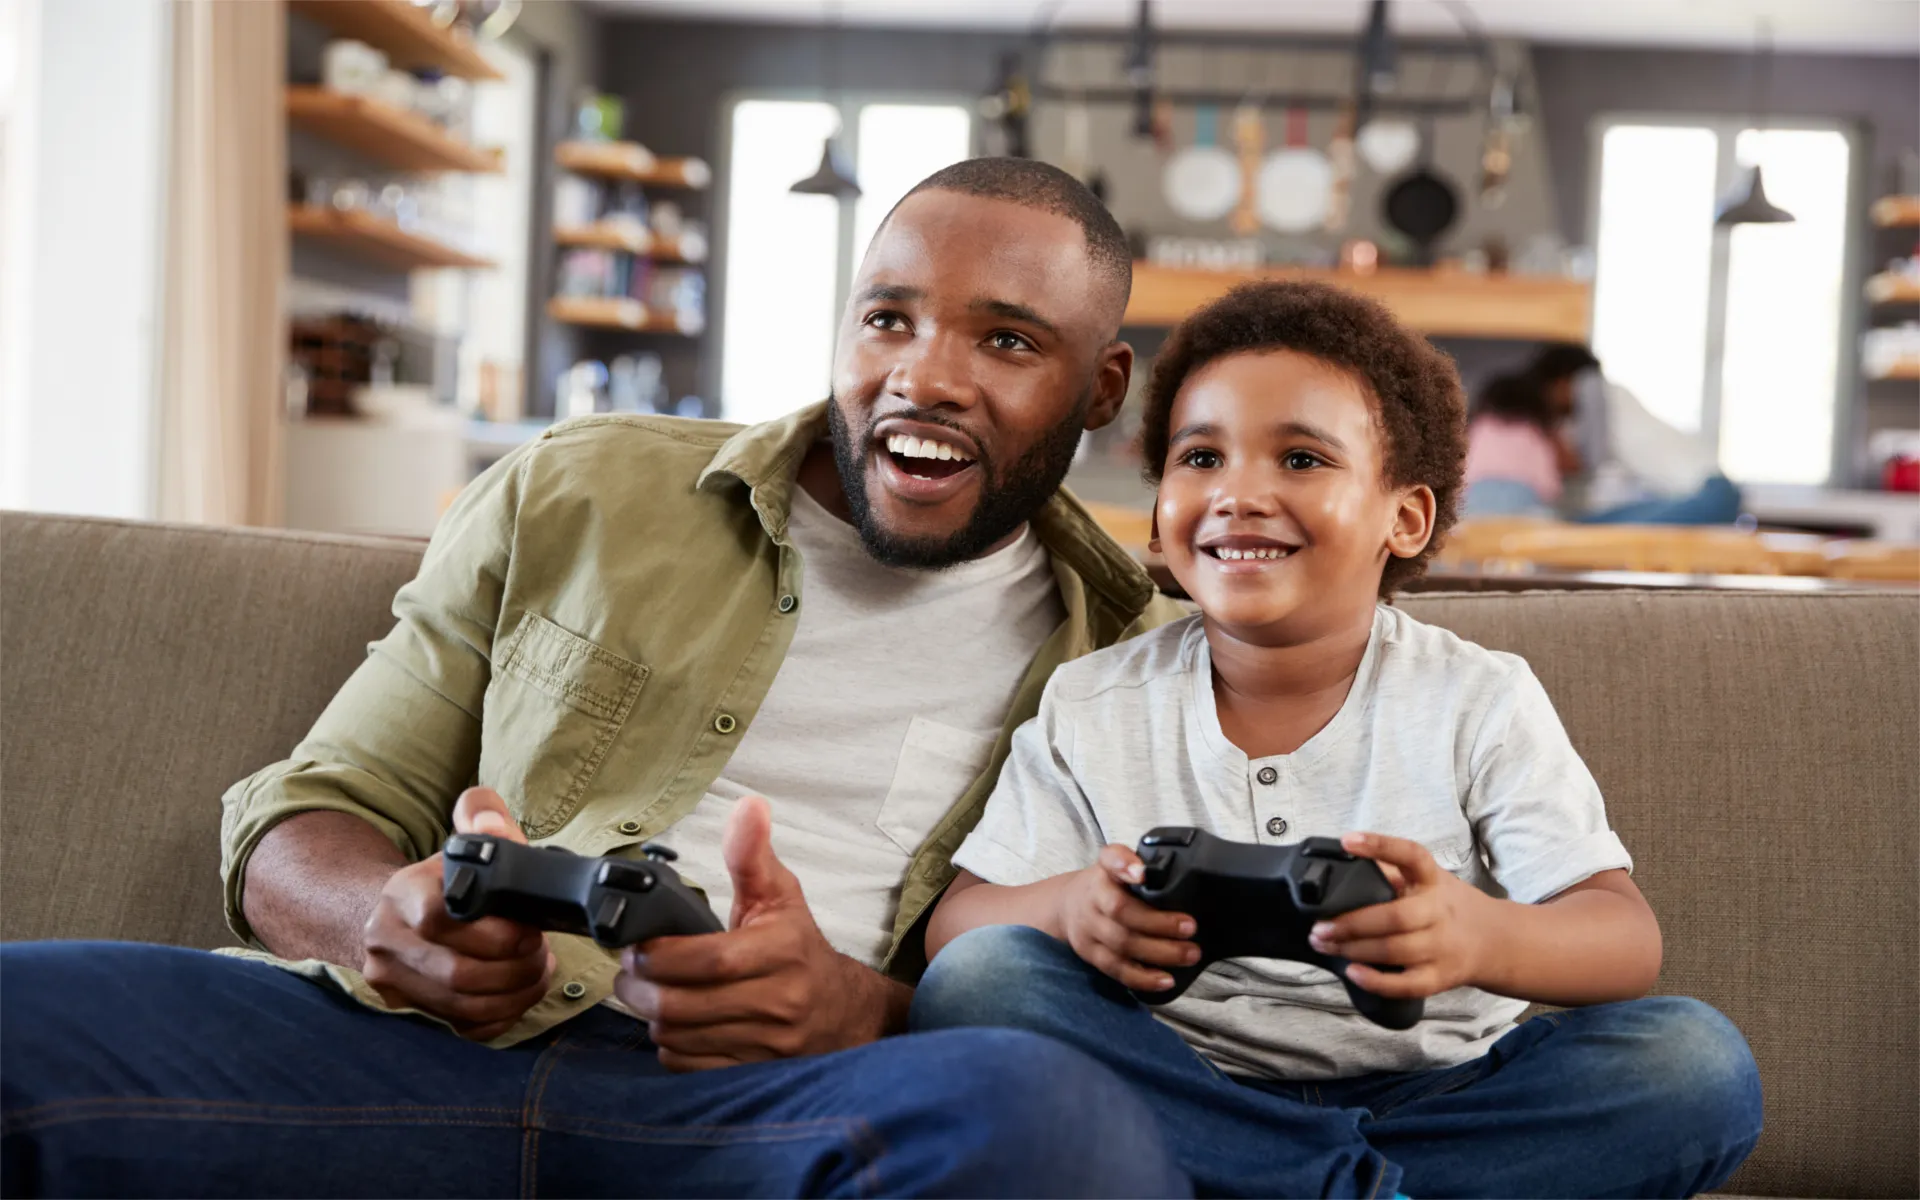 Blast Processing: How to Introduce Your Children to Video Games